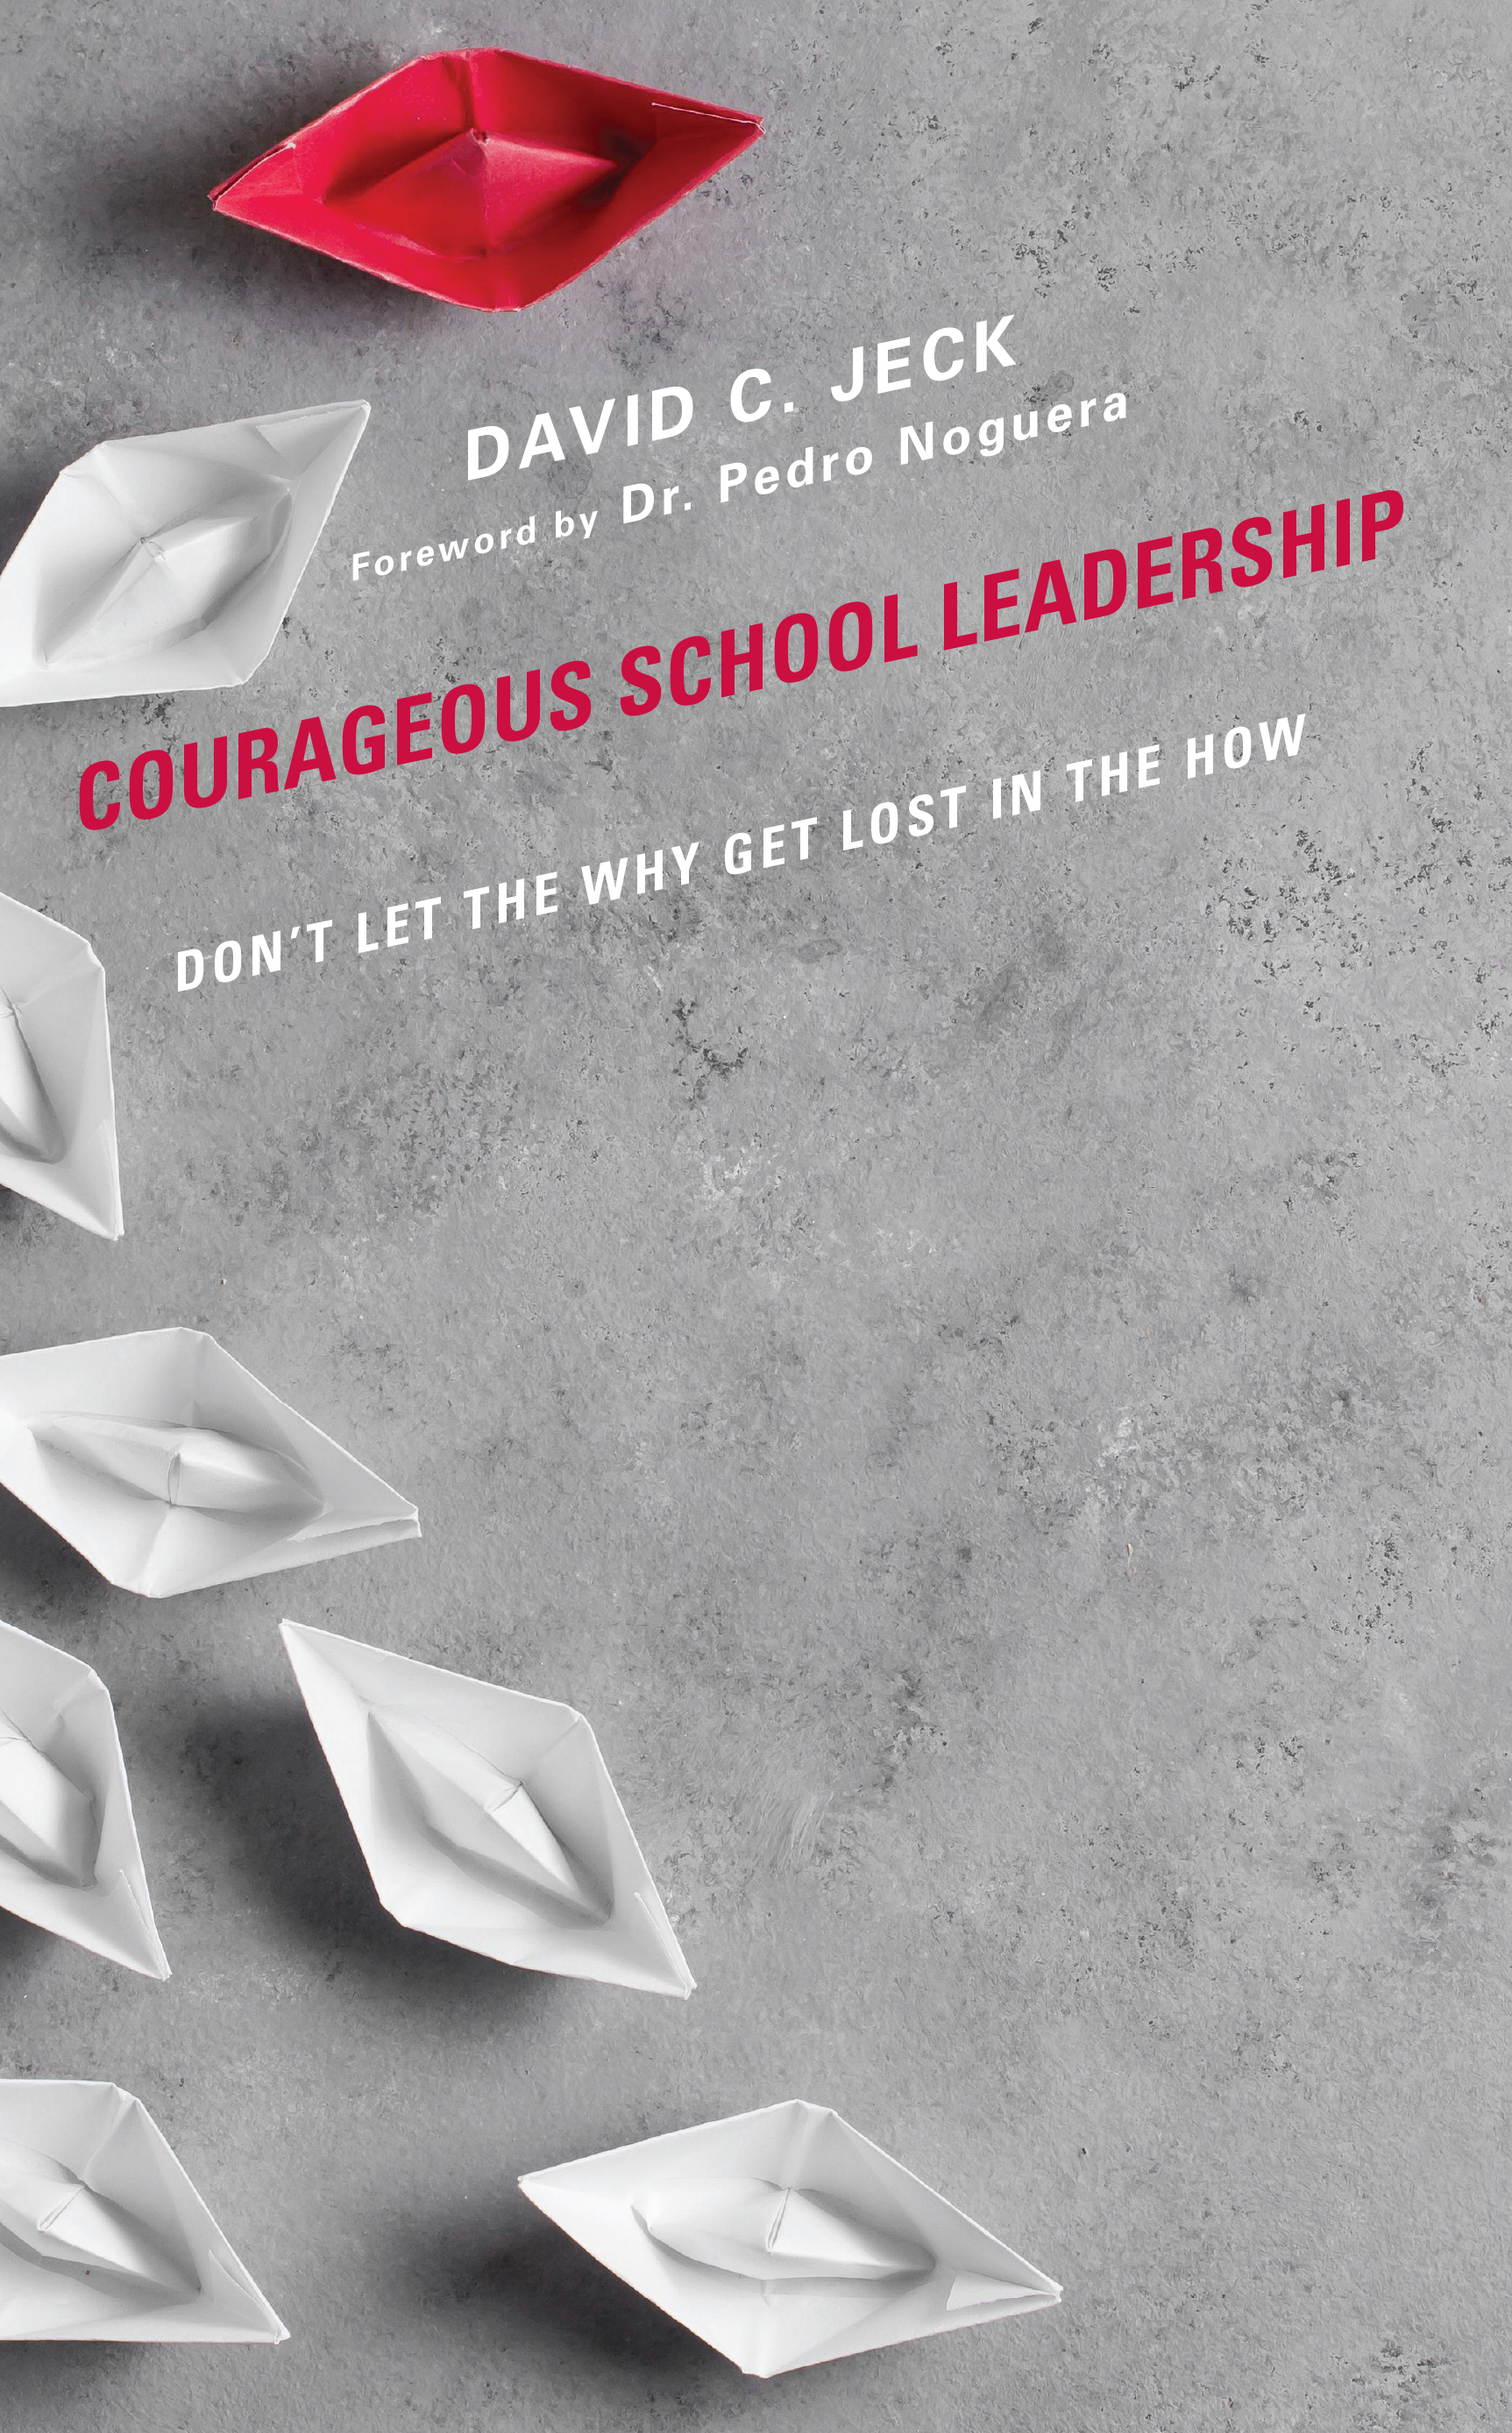 Courageous School Leadership: Don’t Let the Why Get Lost in the How